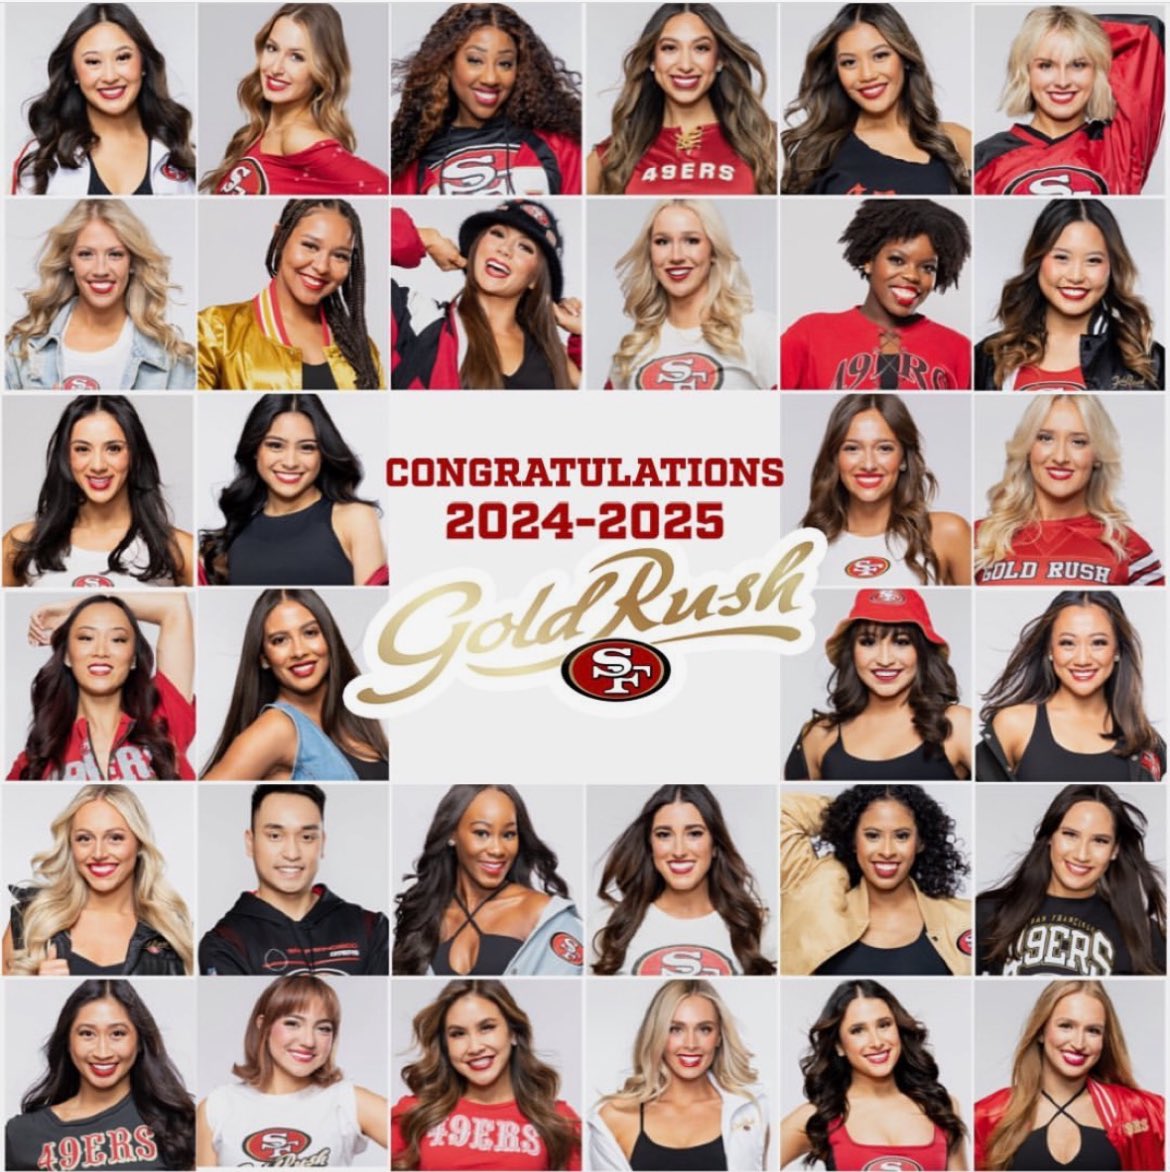 Deepest congratulations to @nphsdanceteam alum and IB dance student for making the @49ers gold Rush team. Katherine is from the Class of 2018 and was always talented. Most importantly, she is kind and extremely hard working. Can’t wait to see you shine this season!